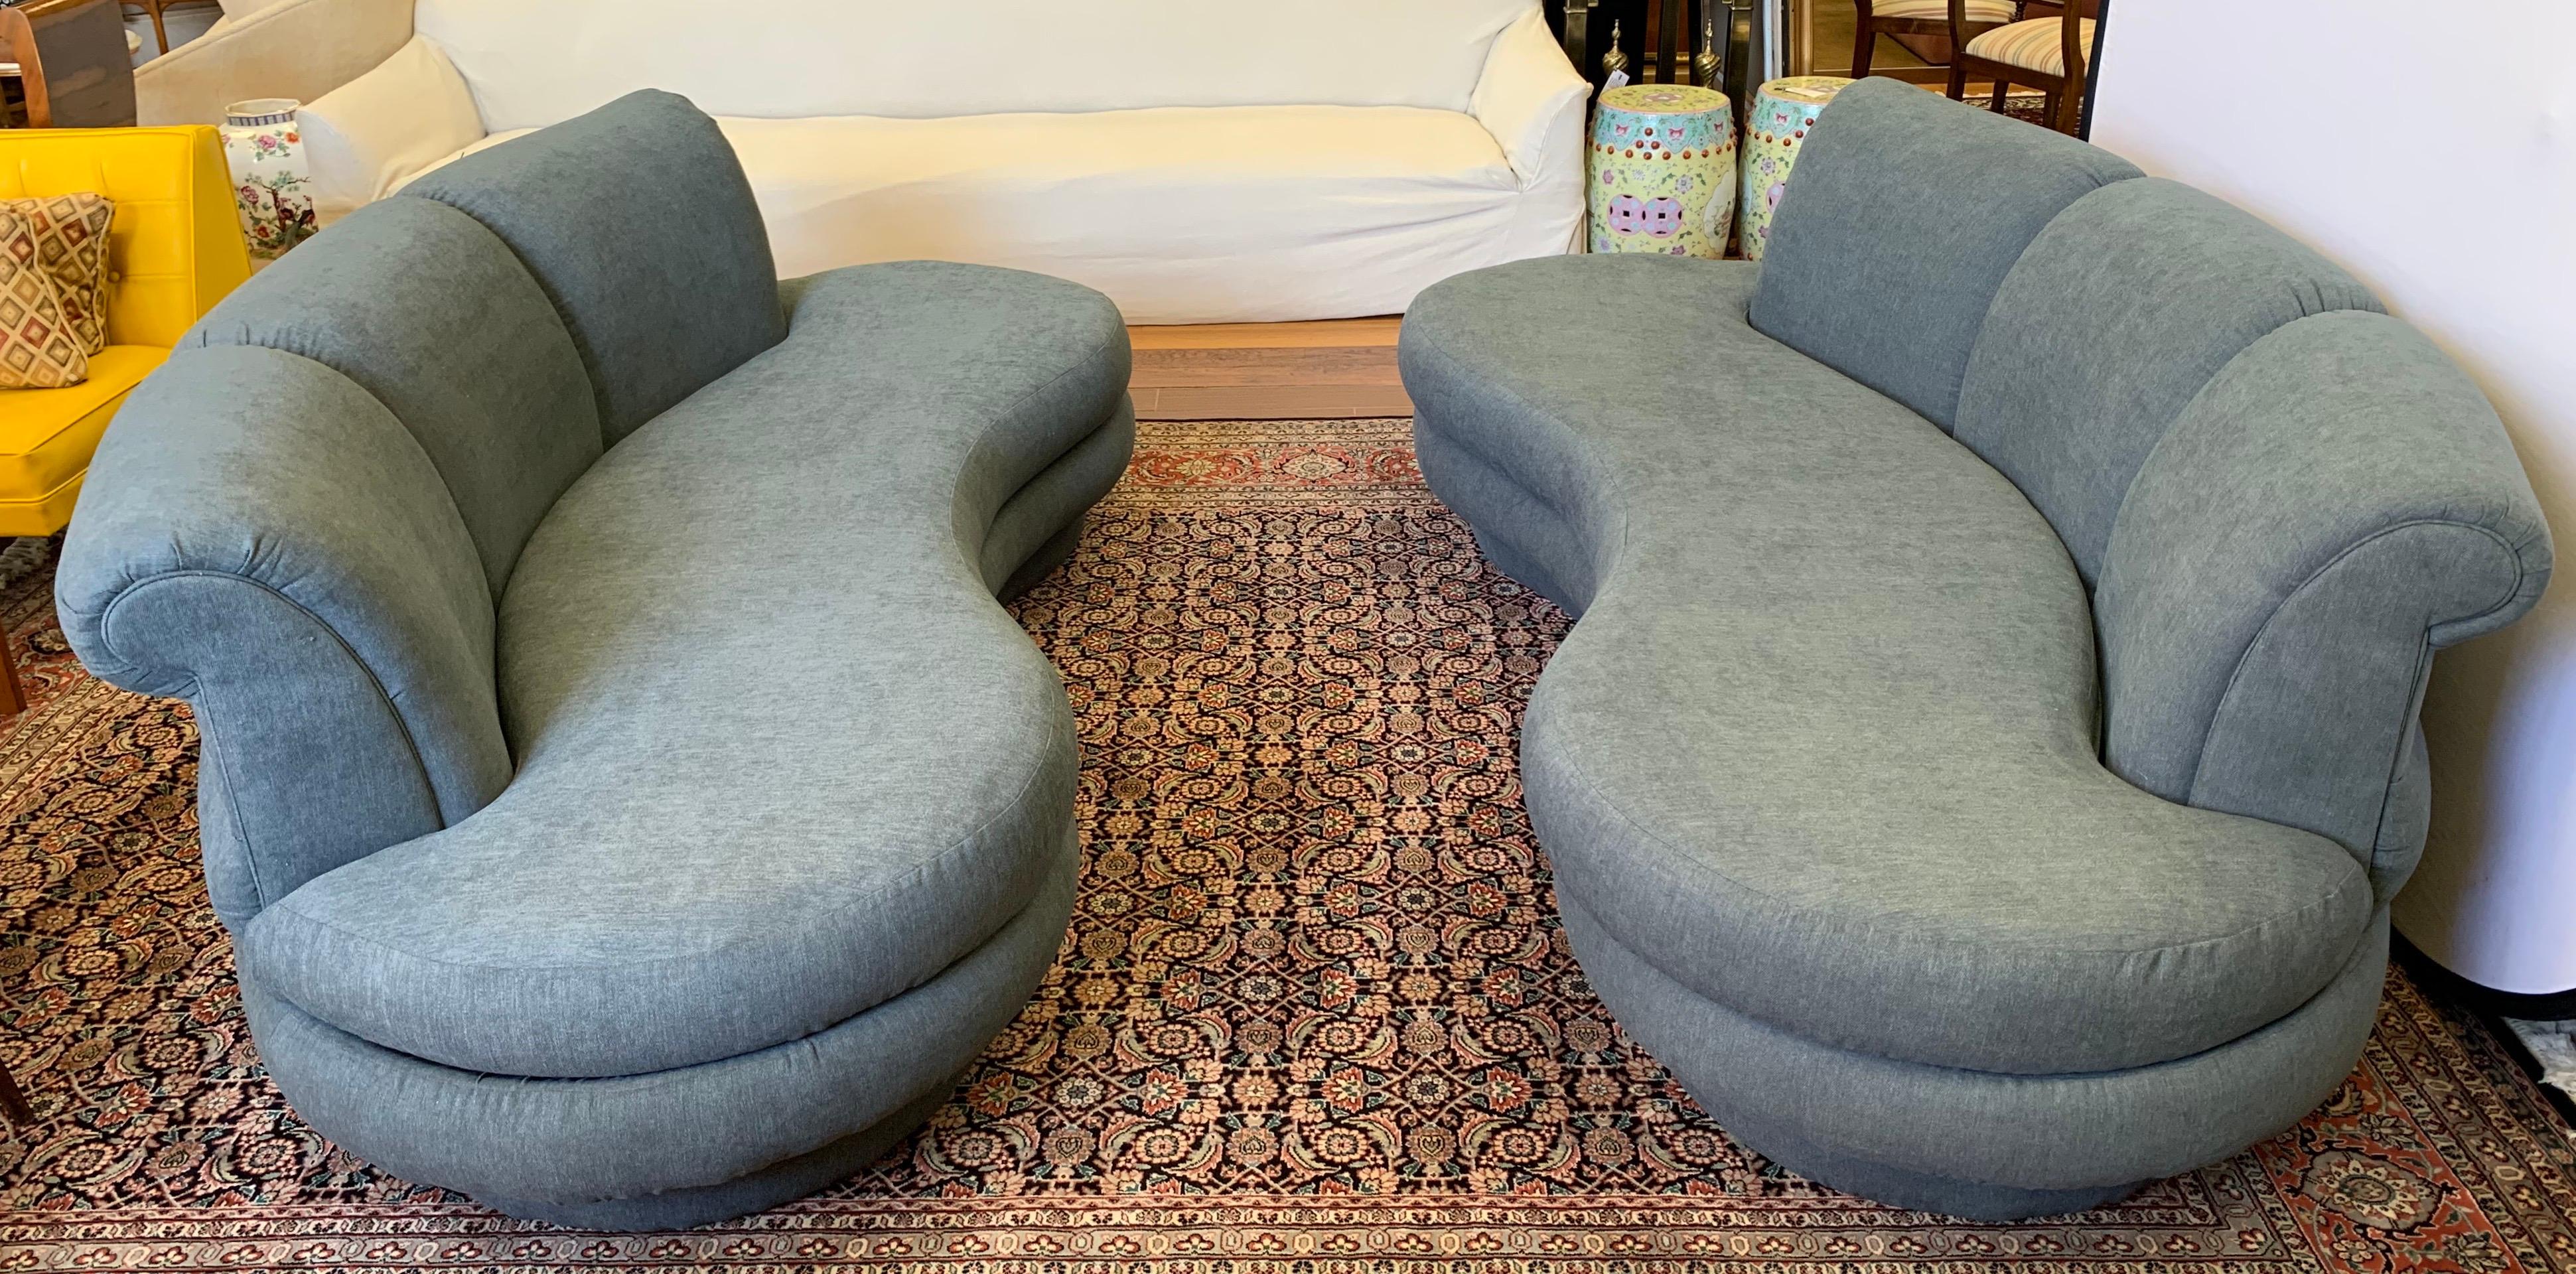 Newly upholstered in a luxurious slate gray cotton blend fabric, this set of two matching Adrian Pearsall Cloud seven foot sofas have the lines, scale and comfort that make them so coveted.
We are selling this set of Pearsall sofas exclusively on